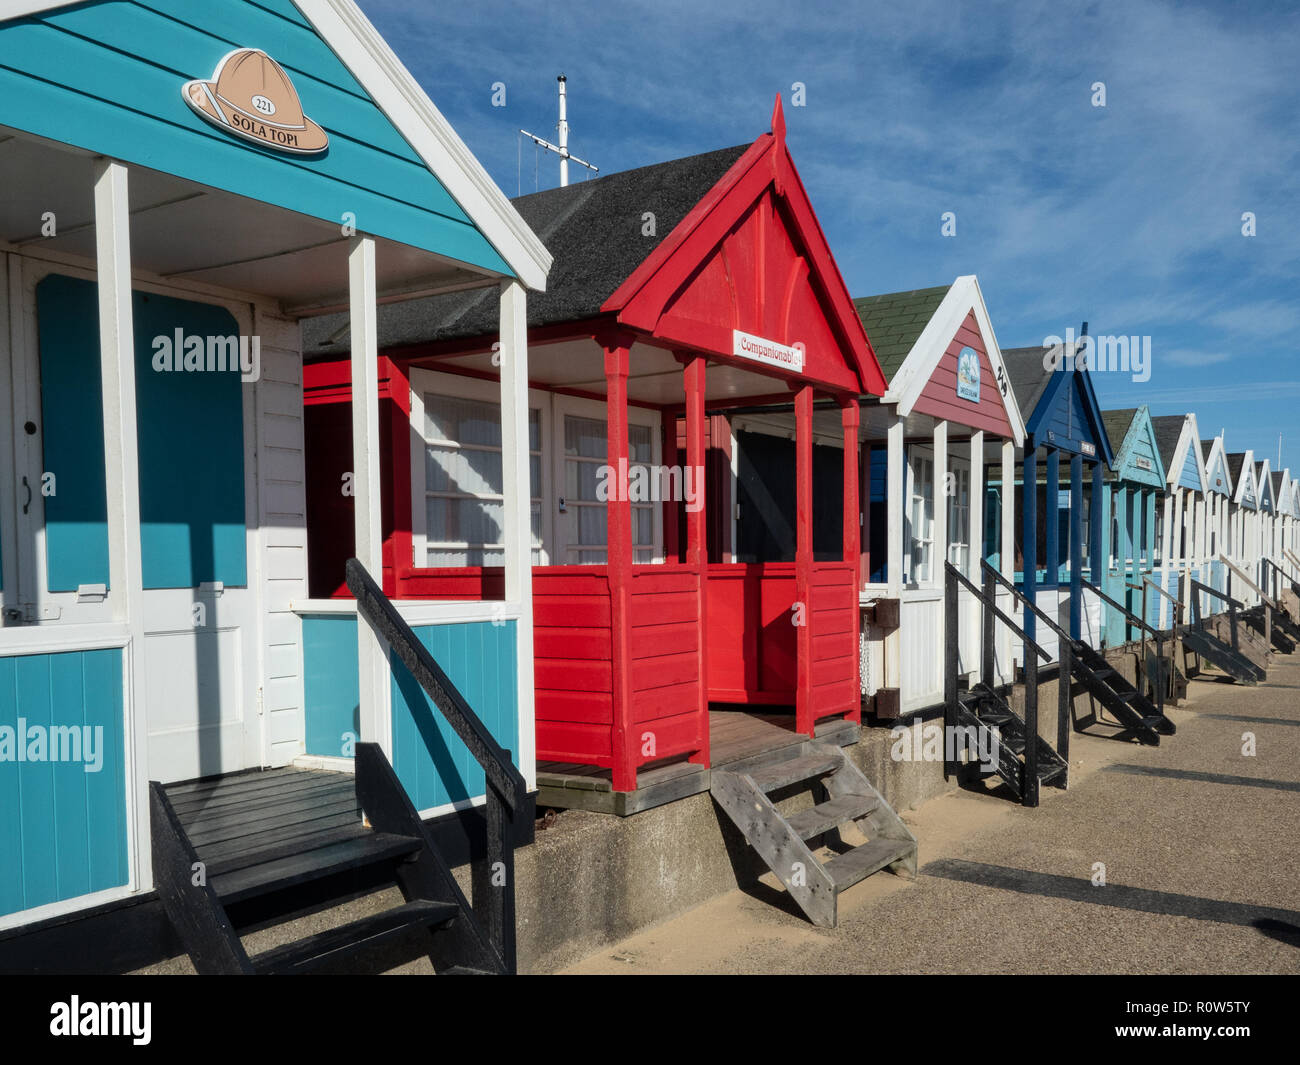 A row of brightly coloured beach huts along the seafront at Southwold against a bright blue sky Stock Photo